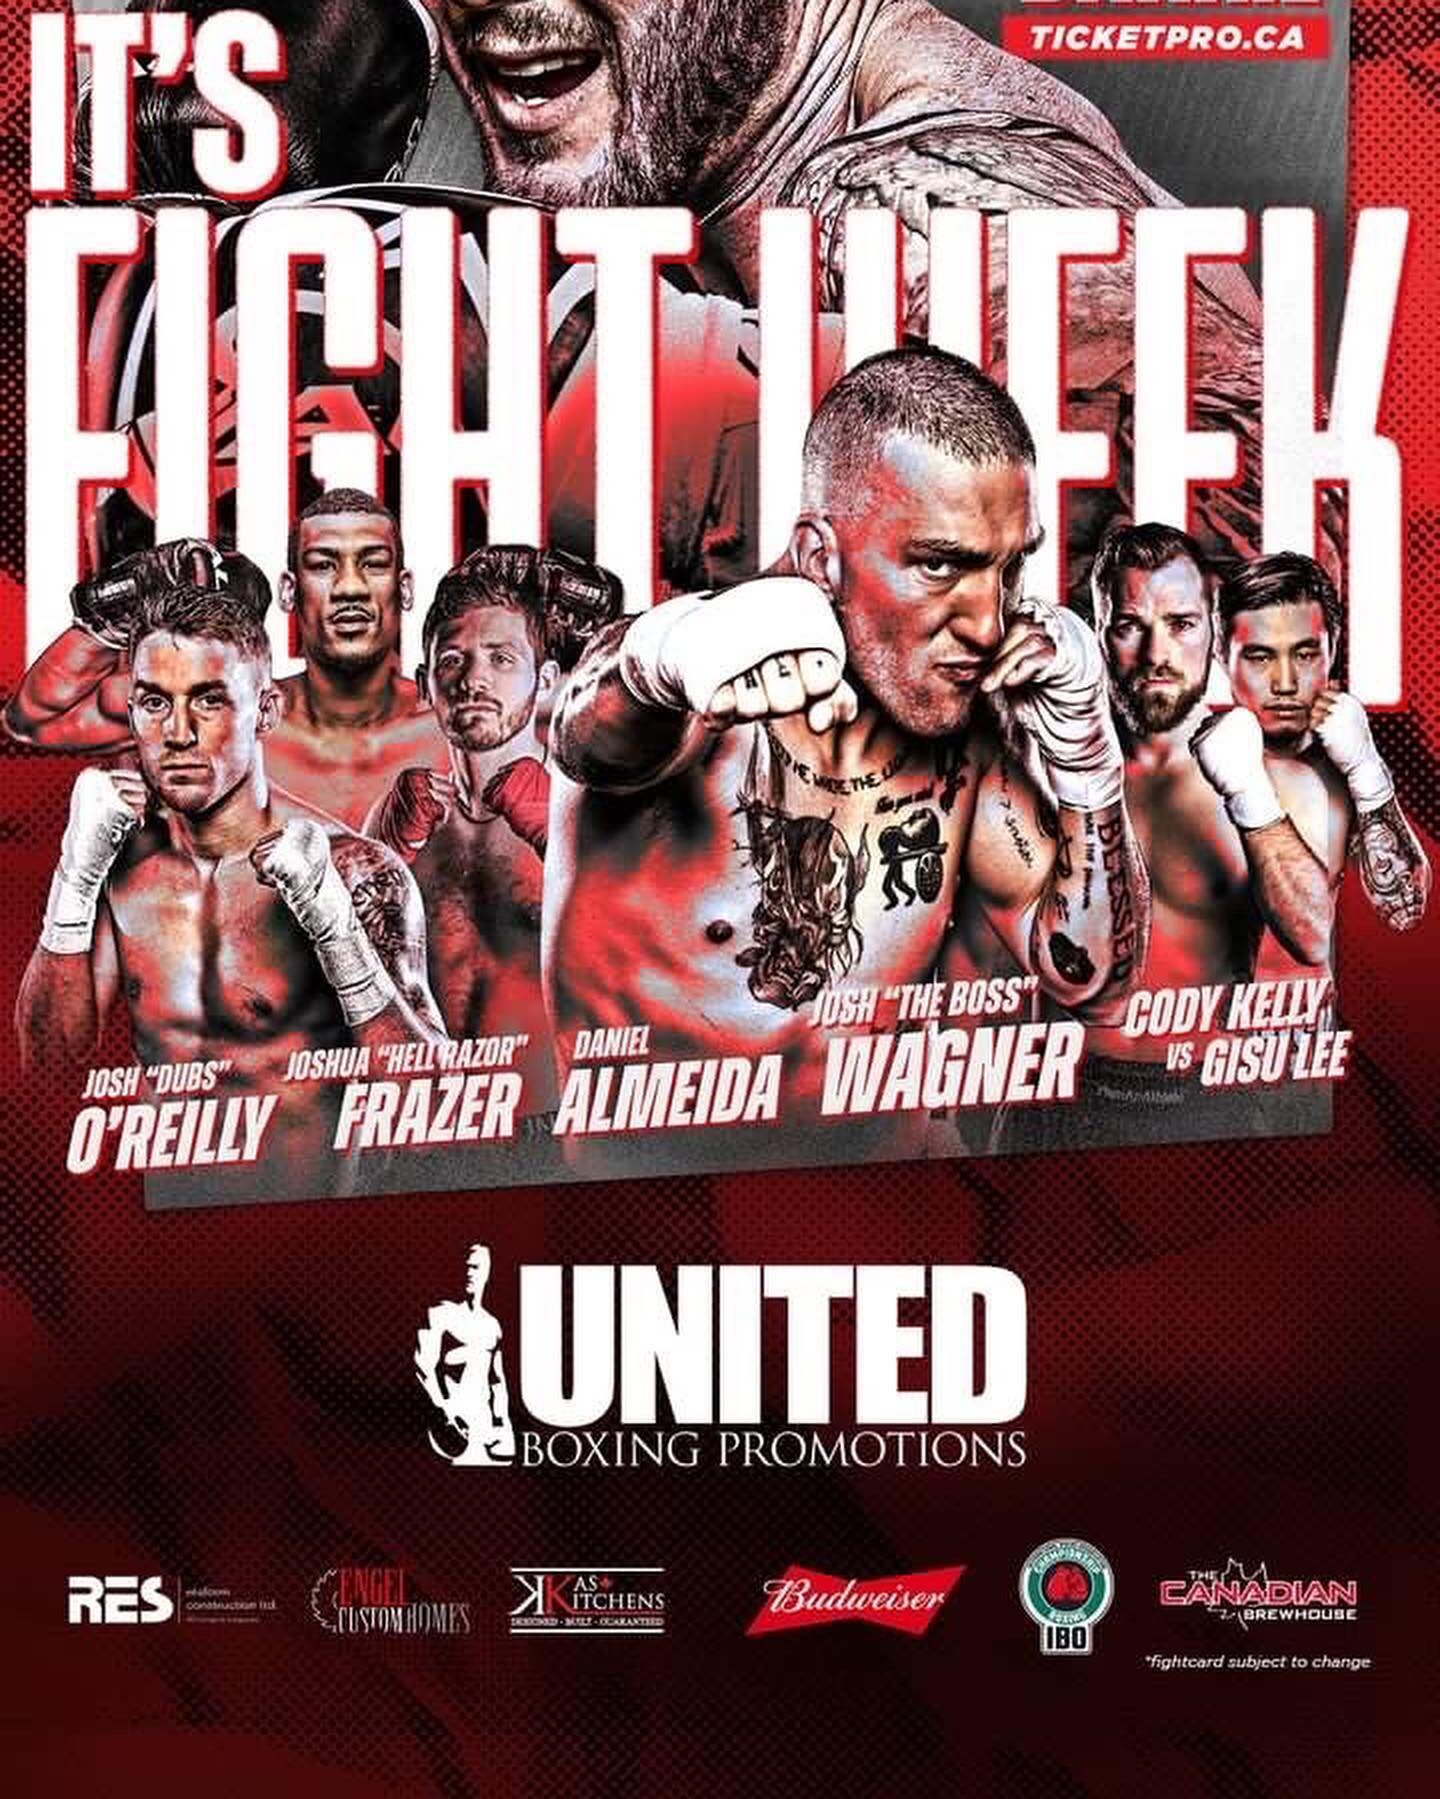 FightWeek Barrie Sadlon Arena 
Click the link In my Bio 
Live boxing Saturday July 8th
Working an preparing for Glory